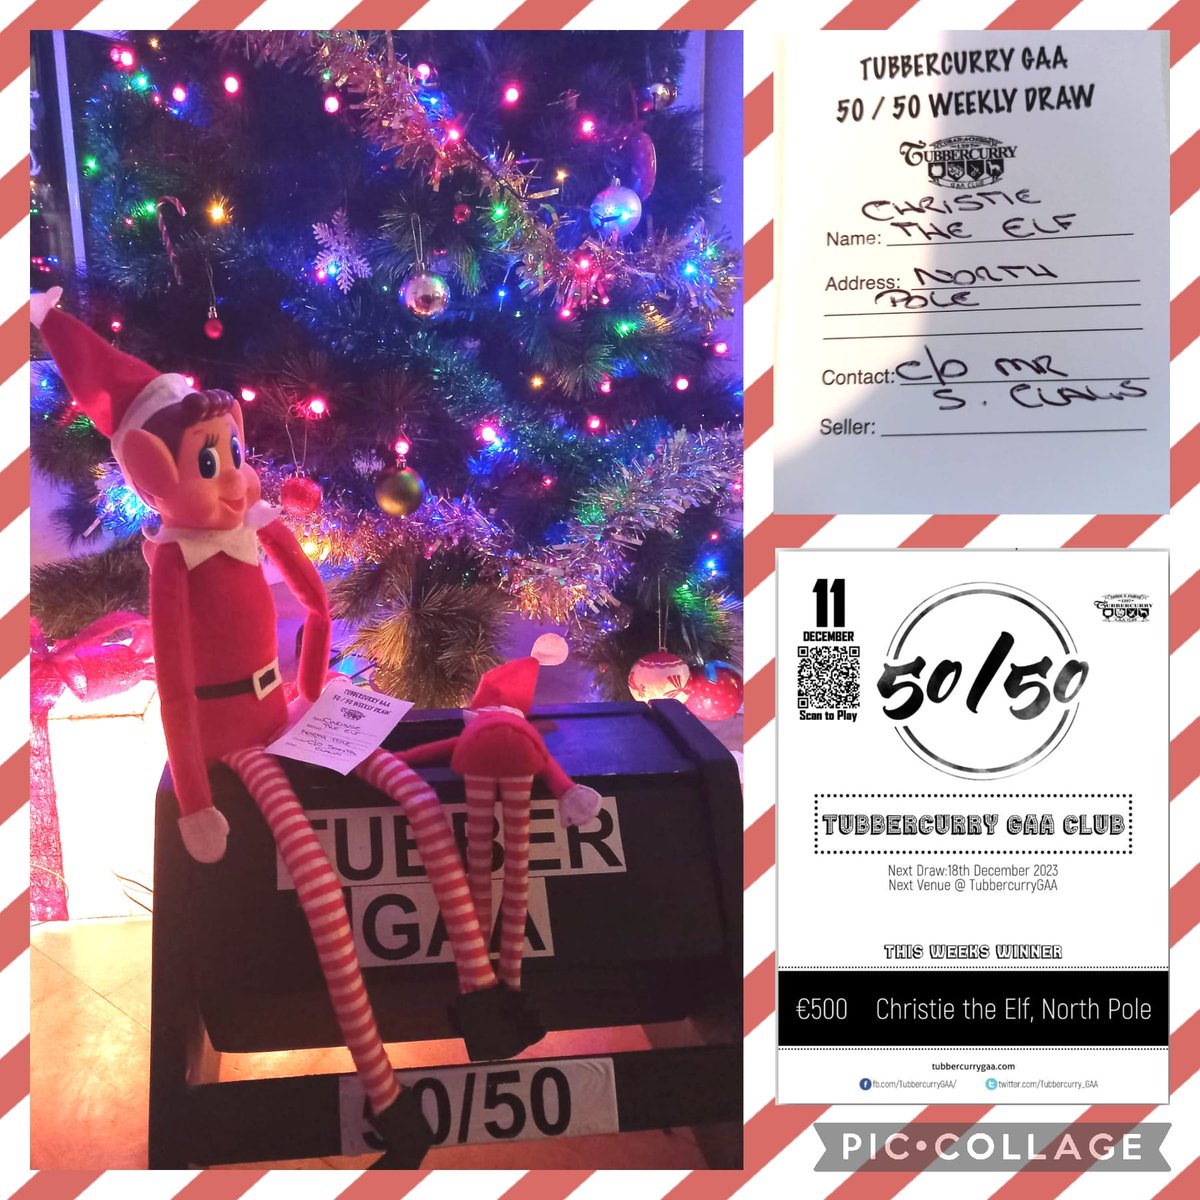 We had some unwanted visitors to HQ last night,Even the elves are looking to get their hands on a few quid for xmas we have given away over €12,000 in this year so far why not play through the link below to potentially get your name on a winning ticket lottoraiser.ie/TubbercurryGAA…